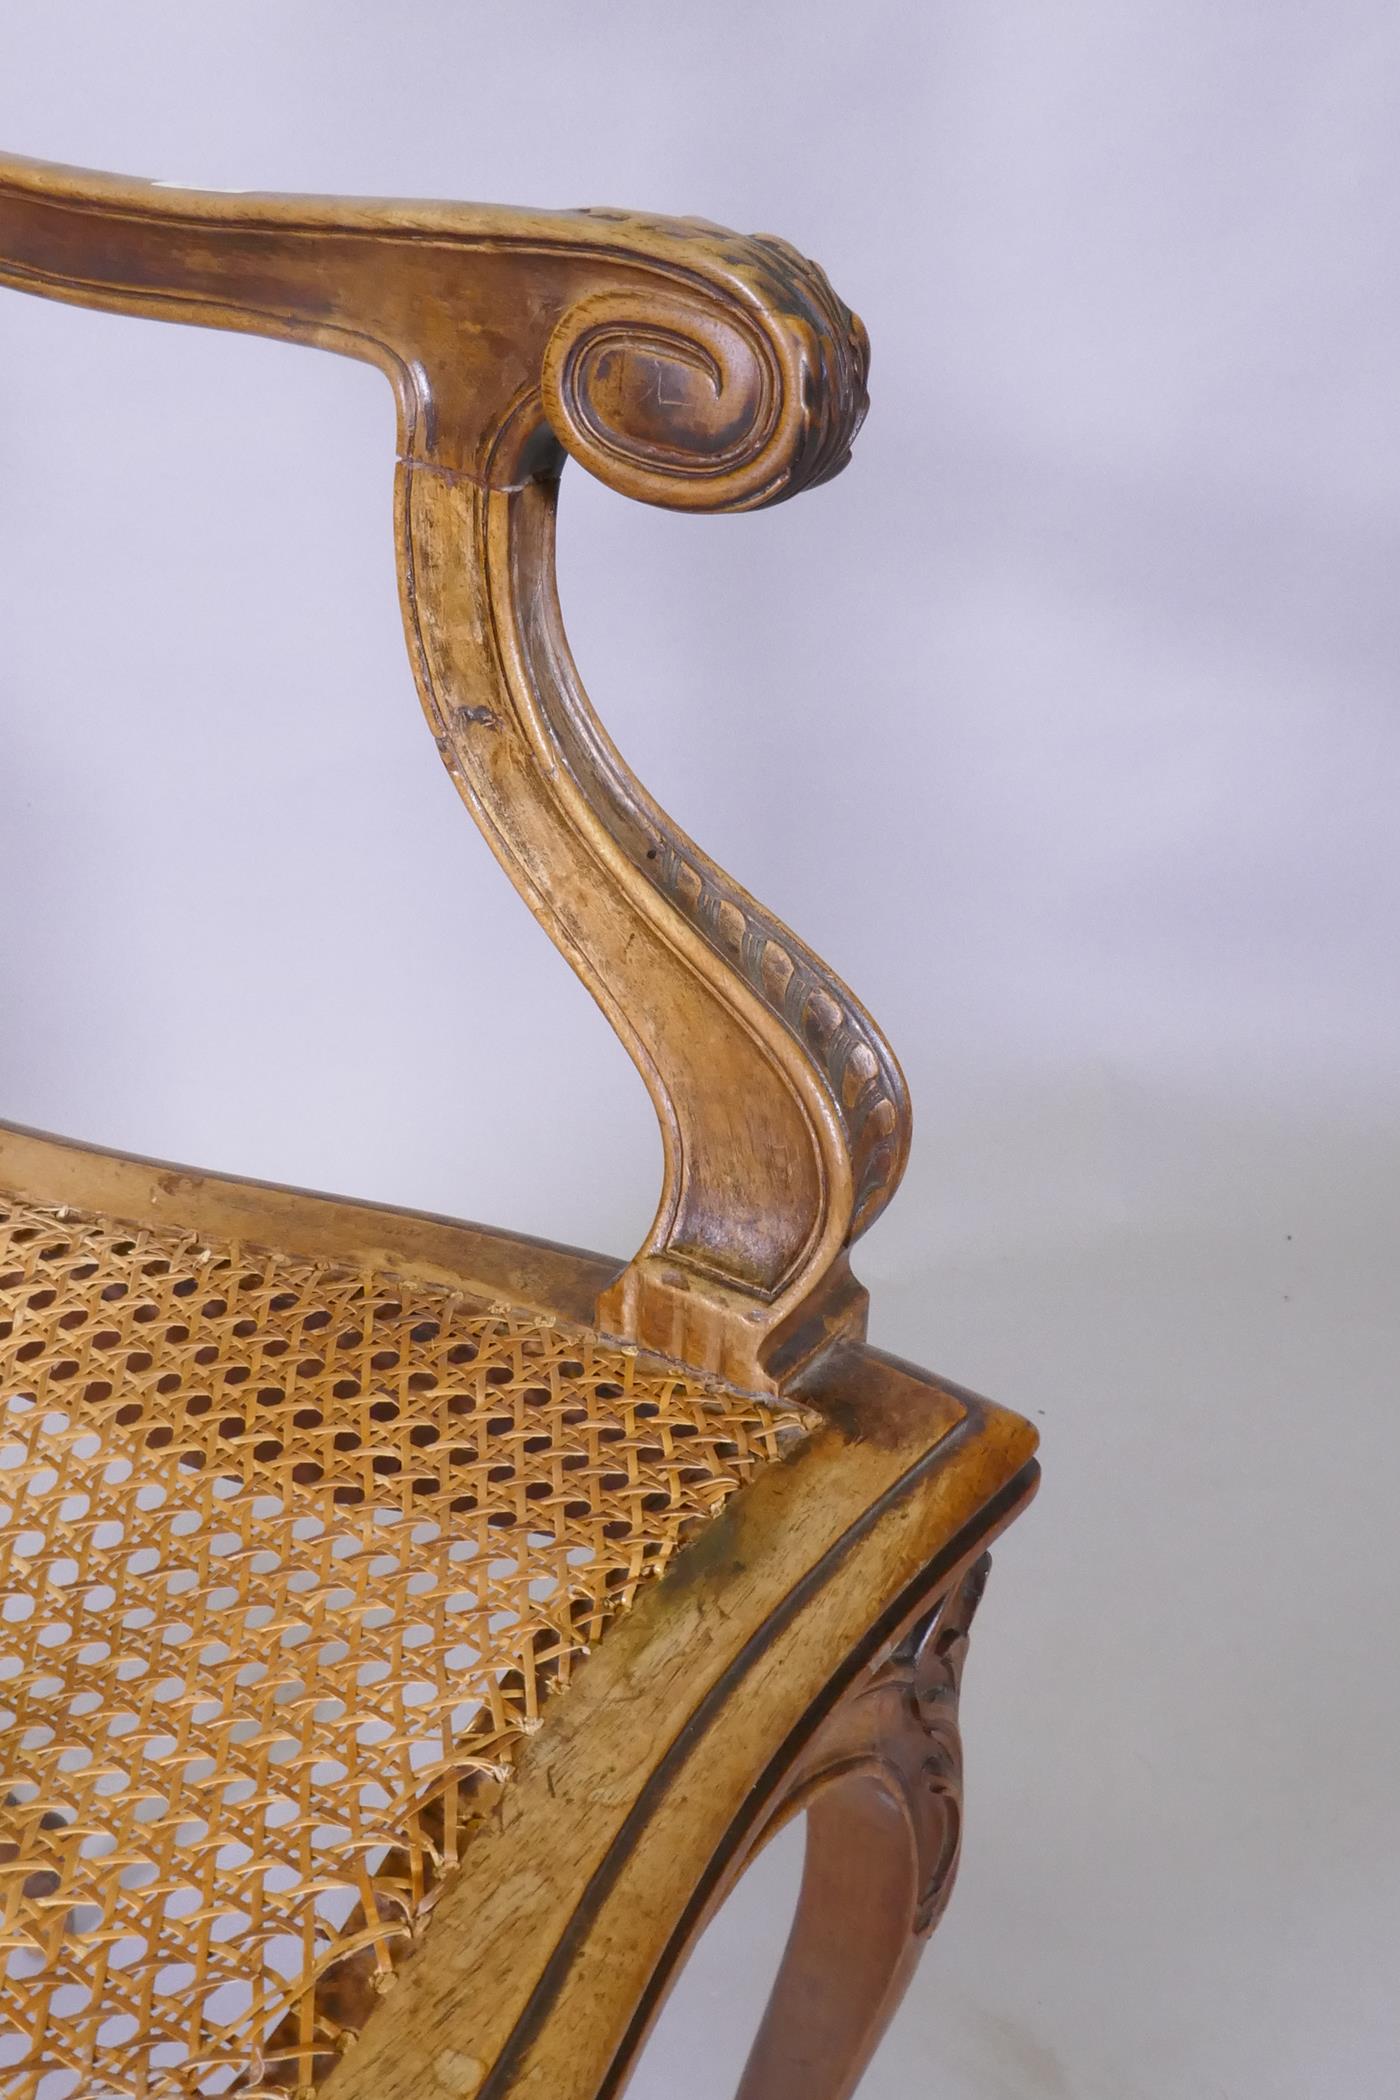 A C19th French carved walnut open arm chair with caned seat - Image 5 of 5